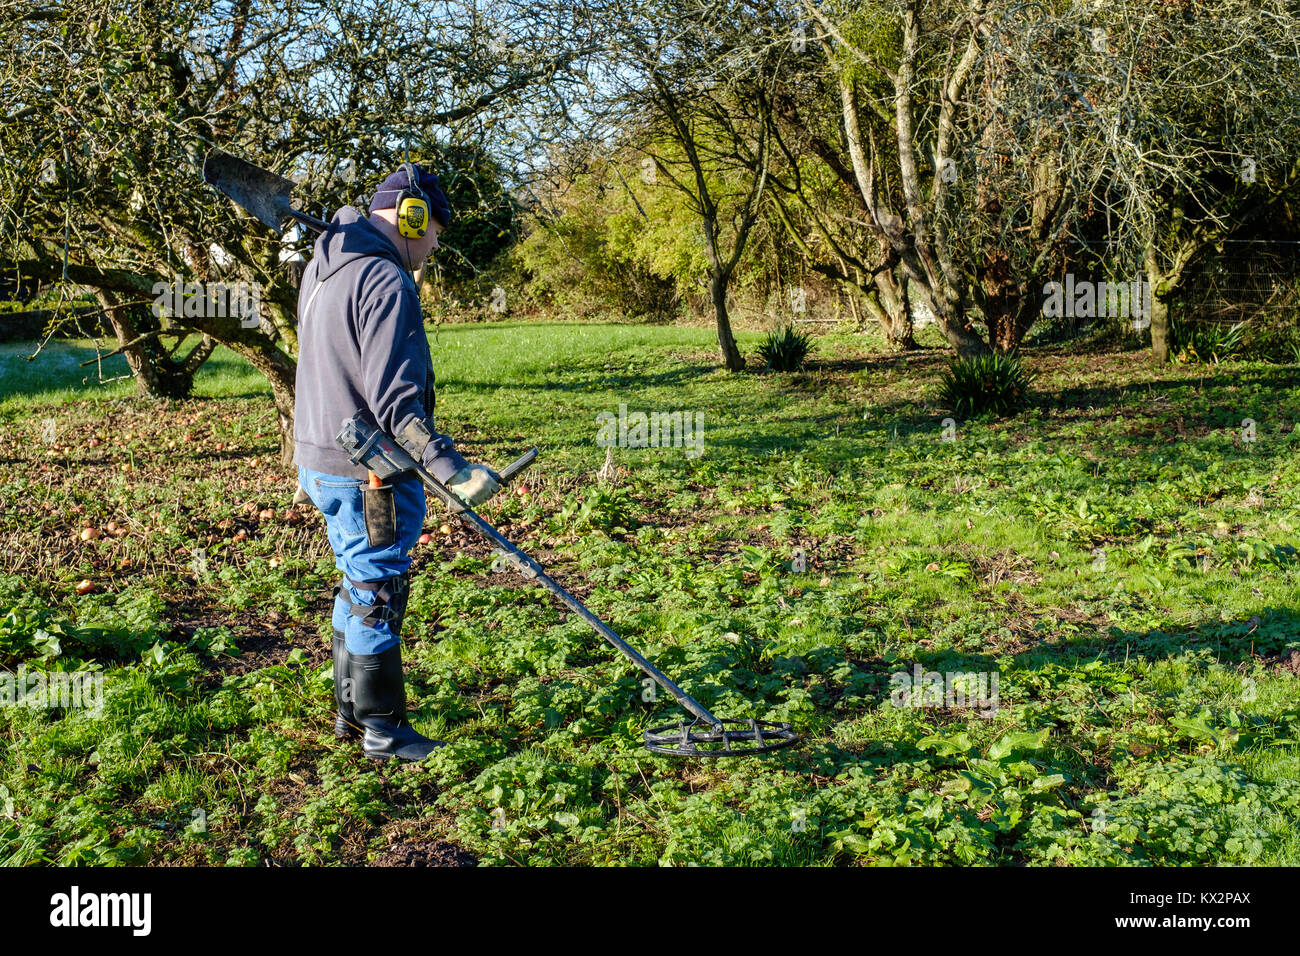 MAN METAL DETECTING IN OLD ORCHARD WITH METAL DETECTING EQUIPMENT. WALES UK Stock Photo